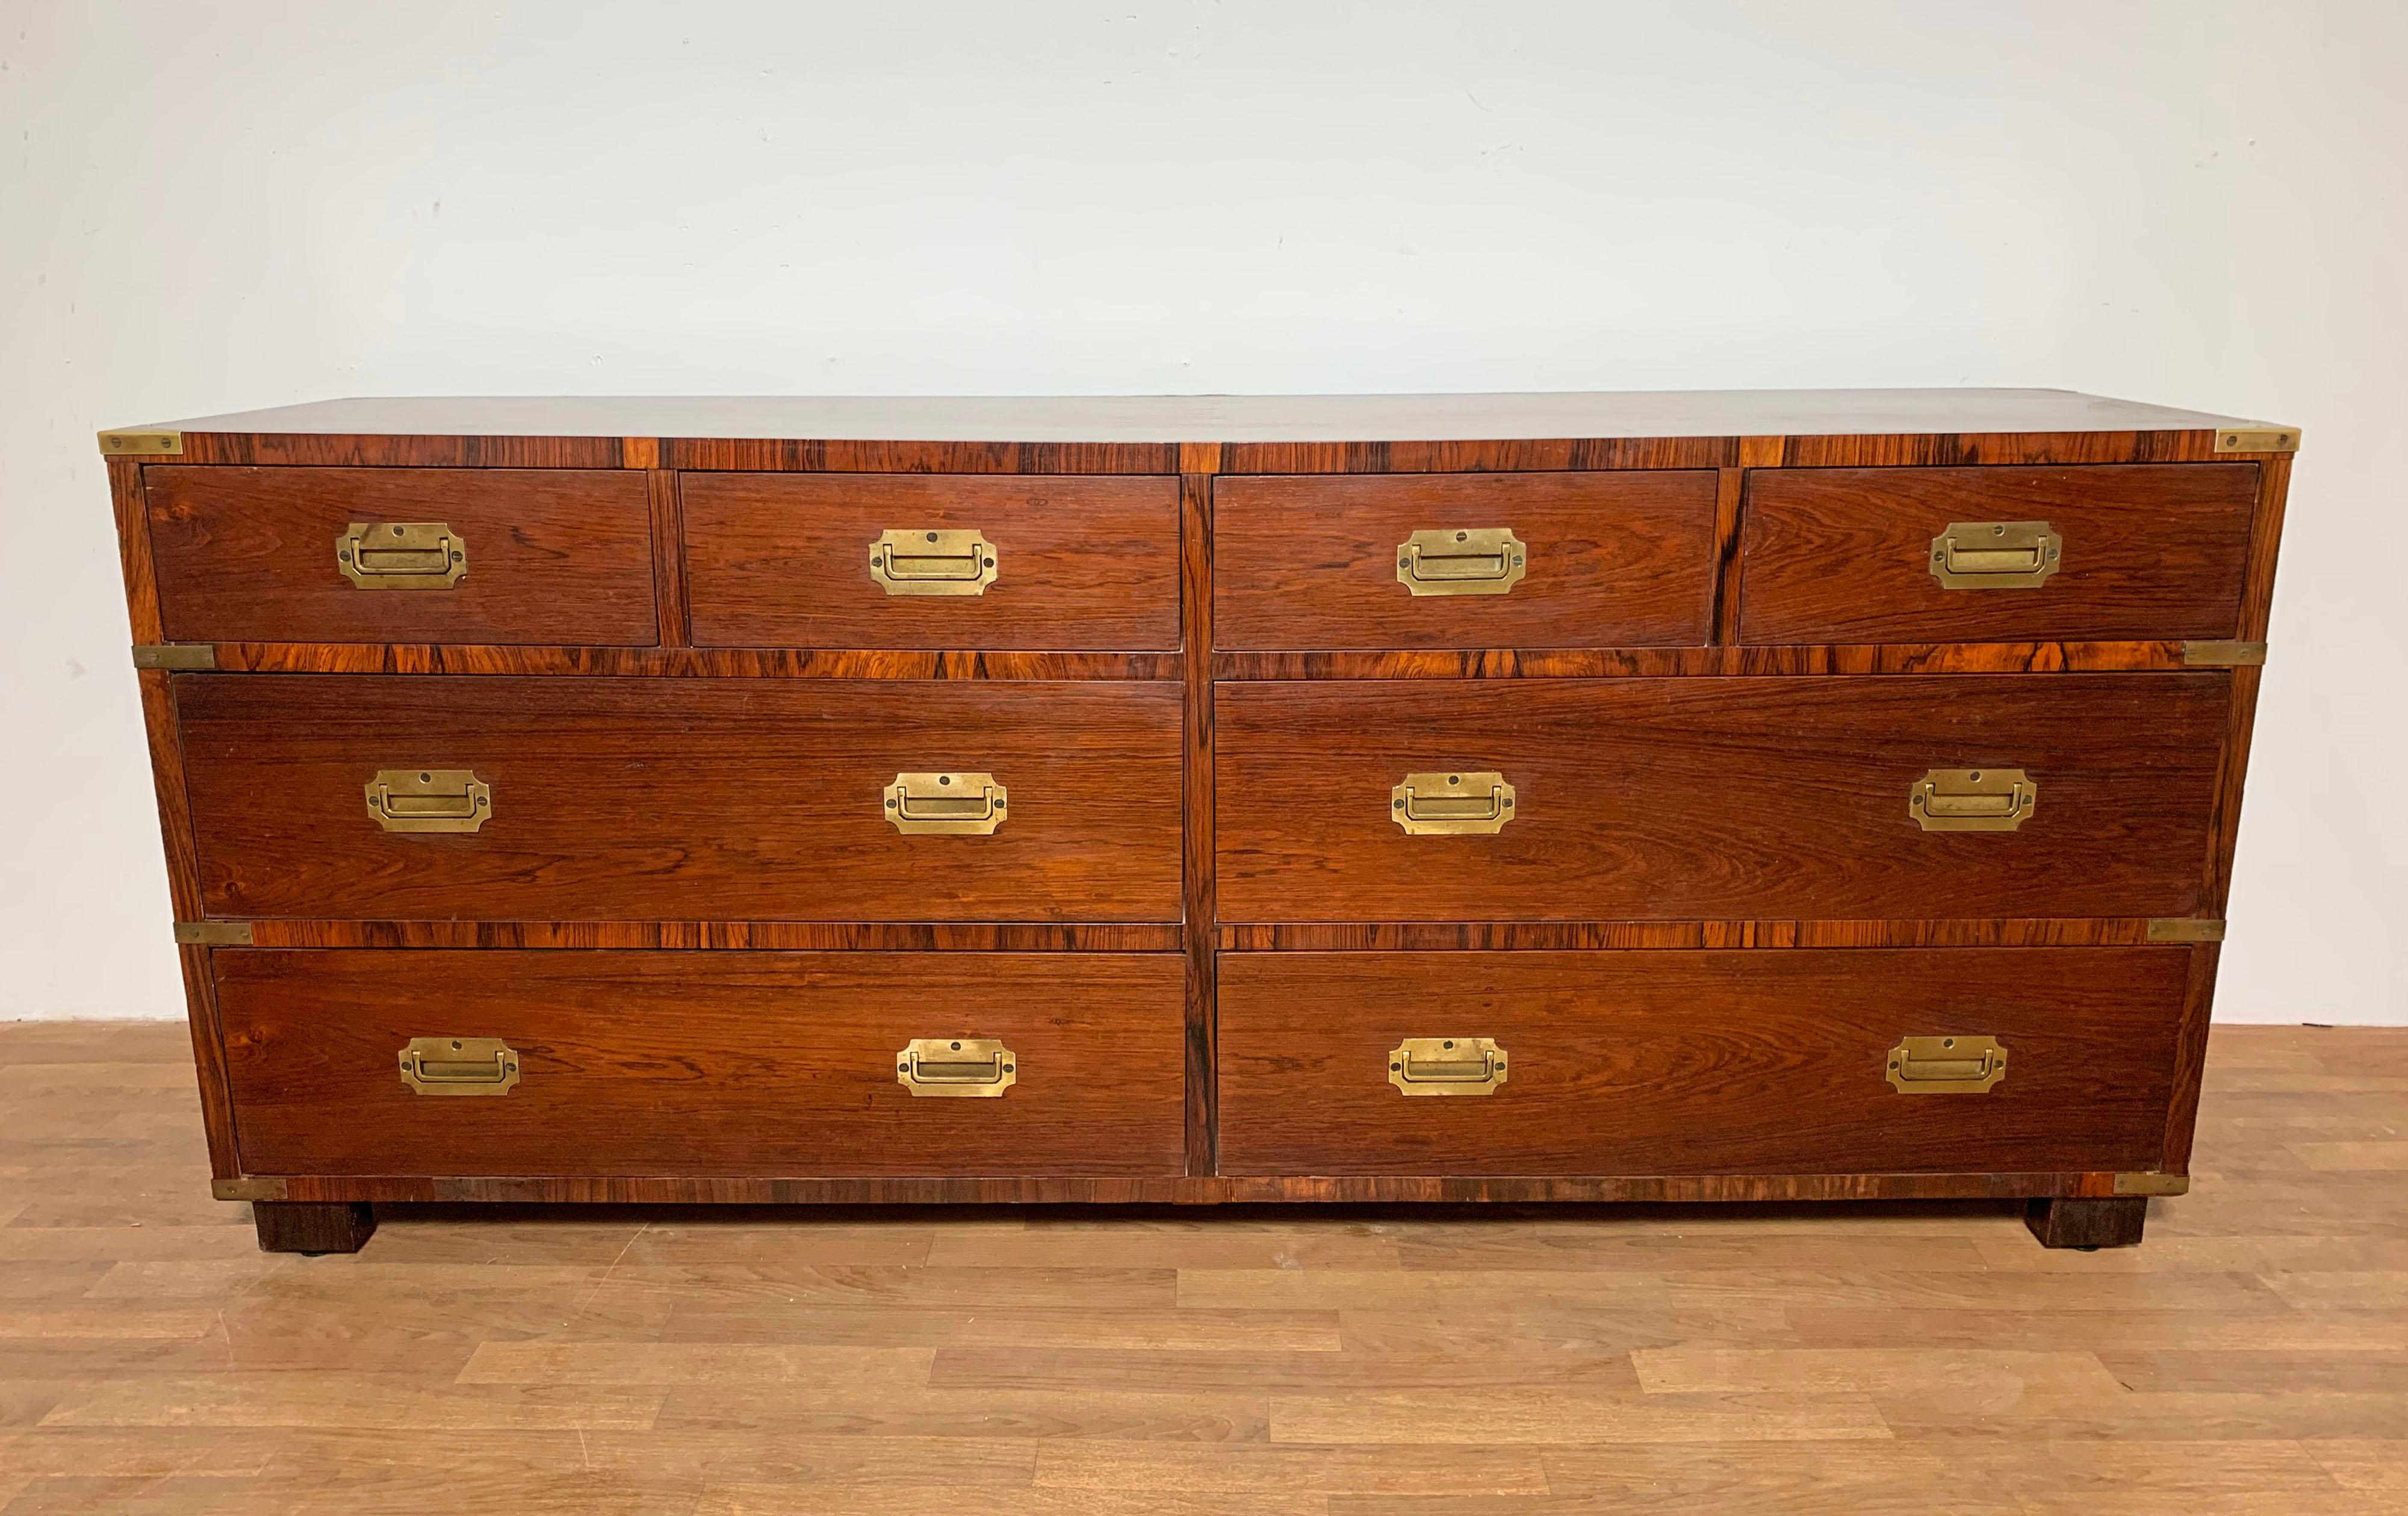 A high quality campaign style dresser in Brazilian rosewood of eight drawers with solid brass corner mounts and hardware, including lift handles. Made in England for the retailer John Stuart of New York in the 1950s.